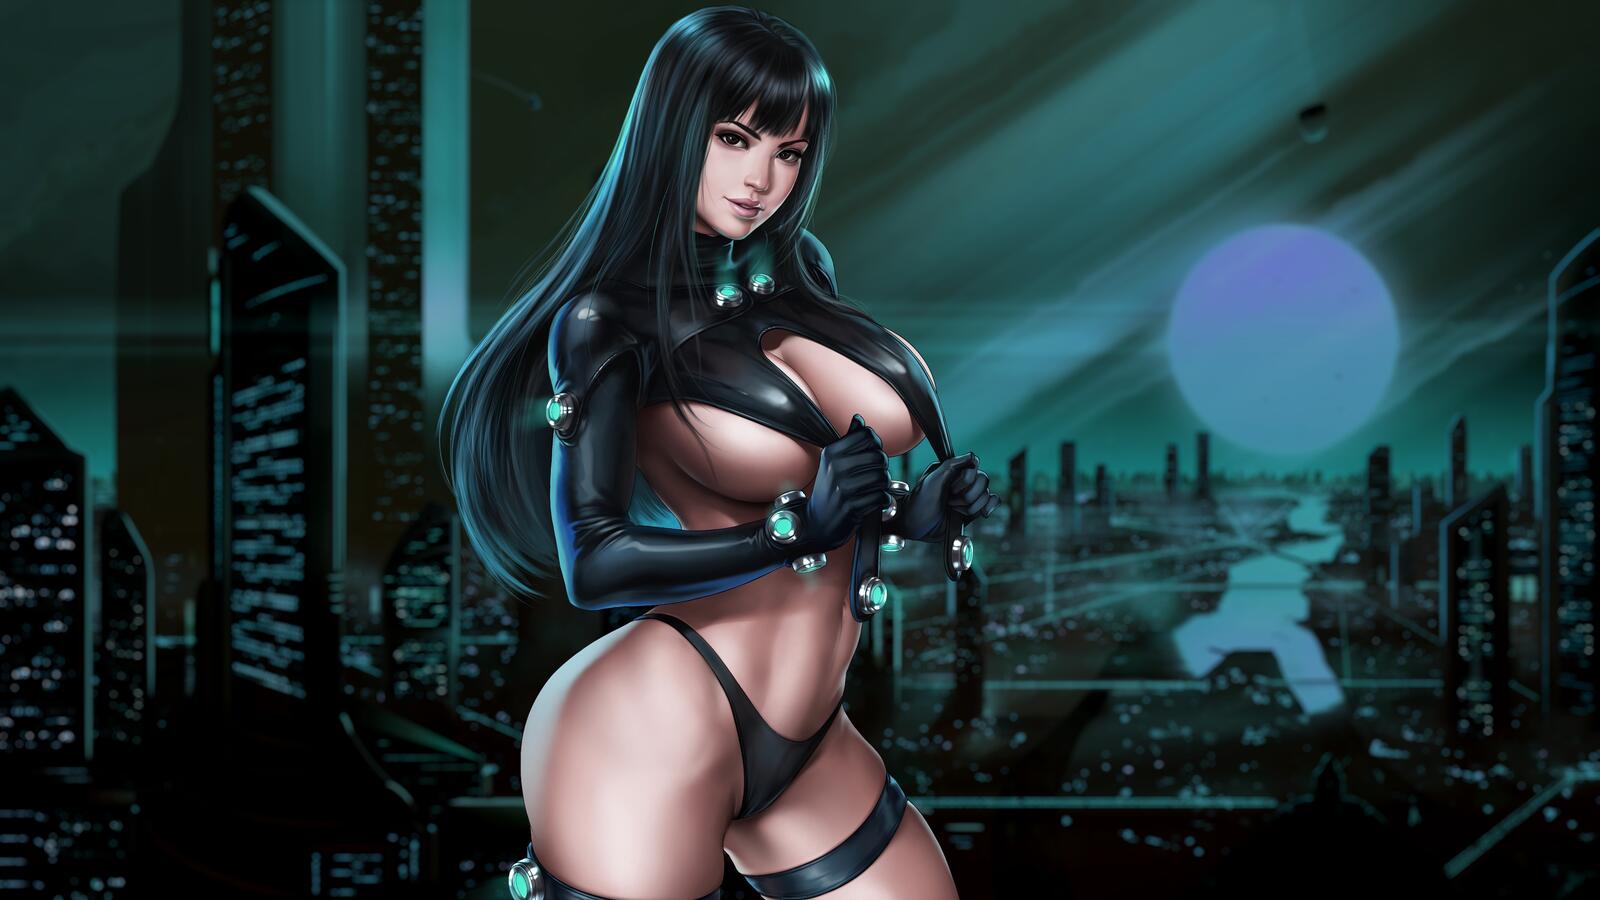 Free photo Drawing of a girl with long hair in erotic black lingerie against a city background